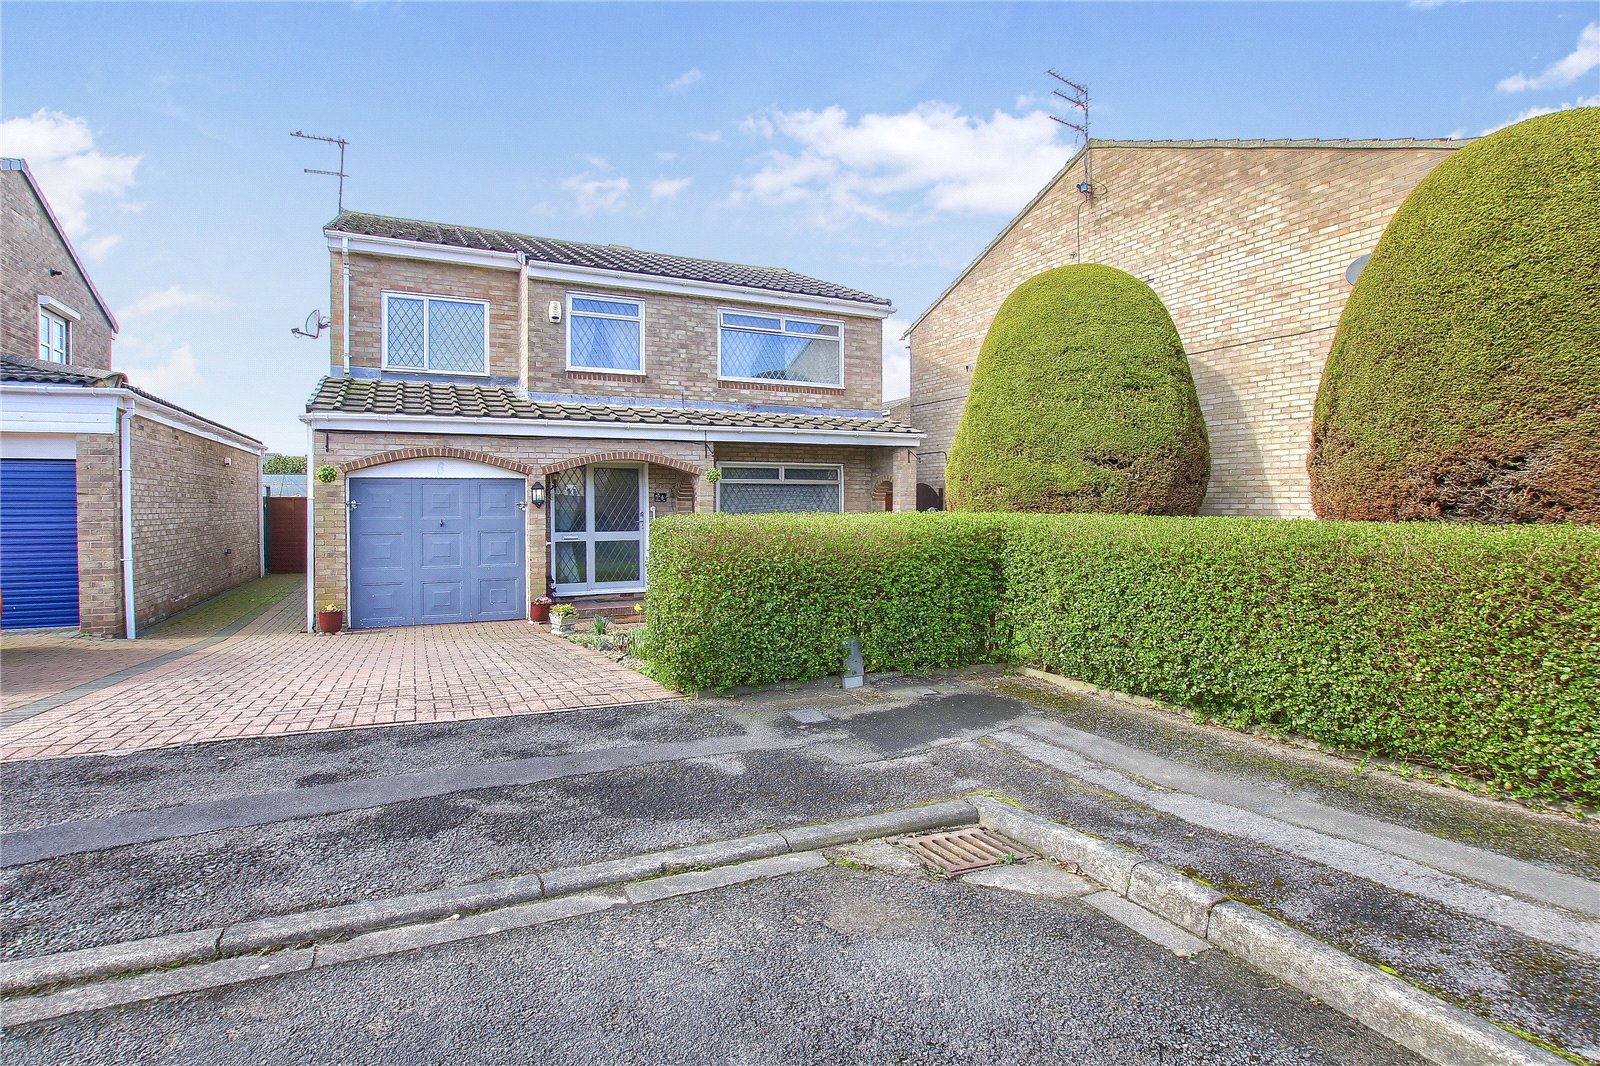 4 bed house for sale in Watton Close, South Fens 1